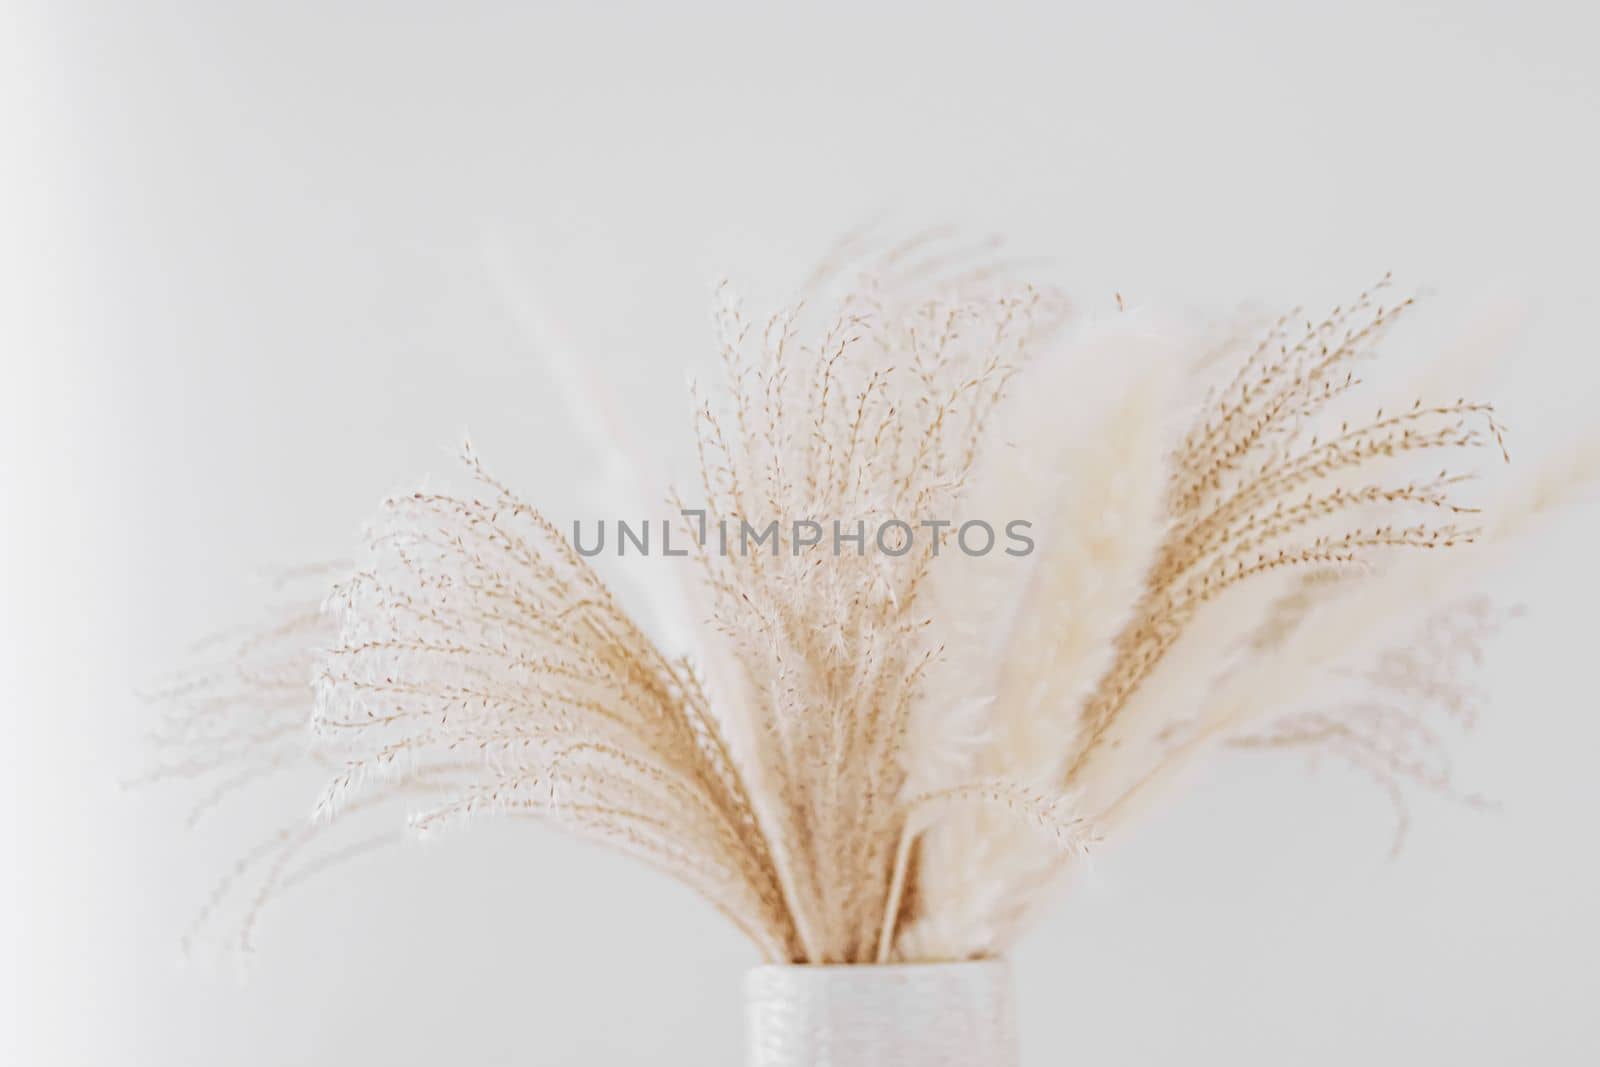 Neutral dry plants in vase and wall with copyspace, home decor and interior design.